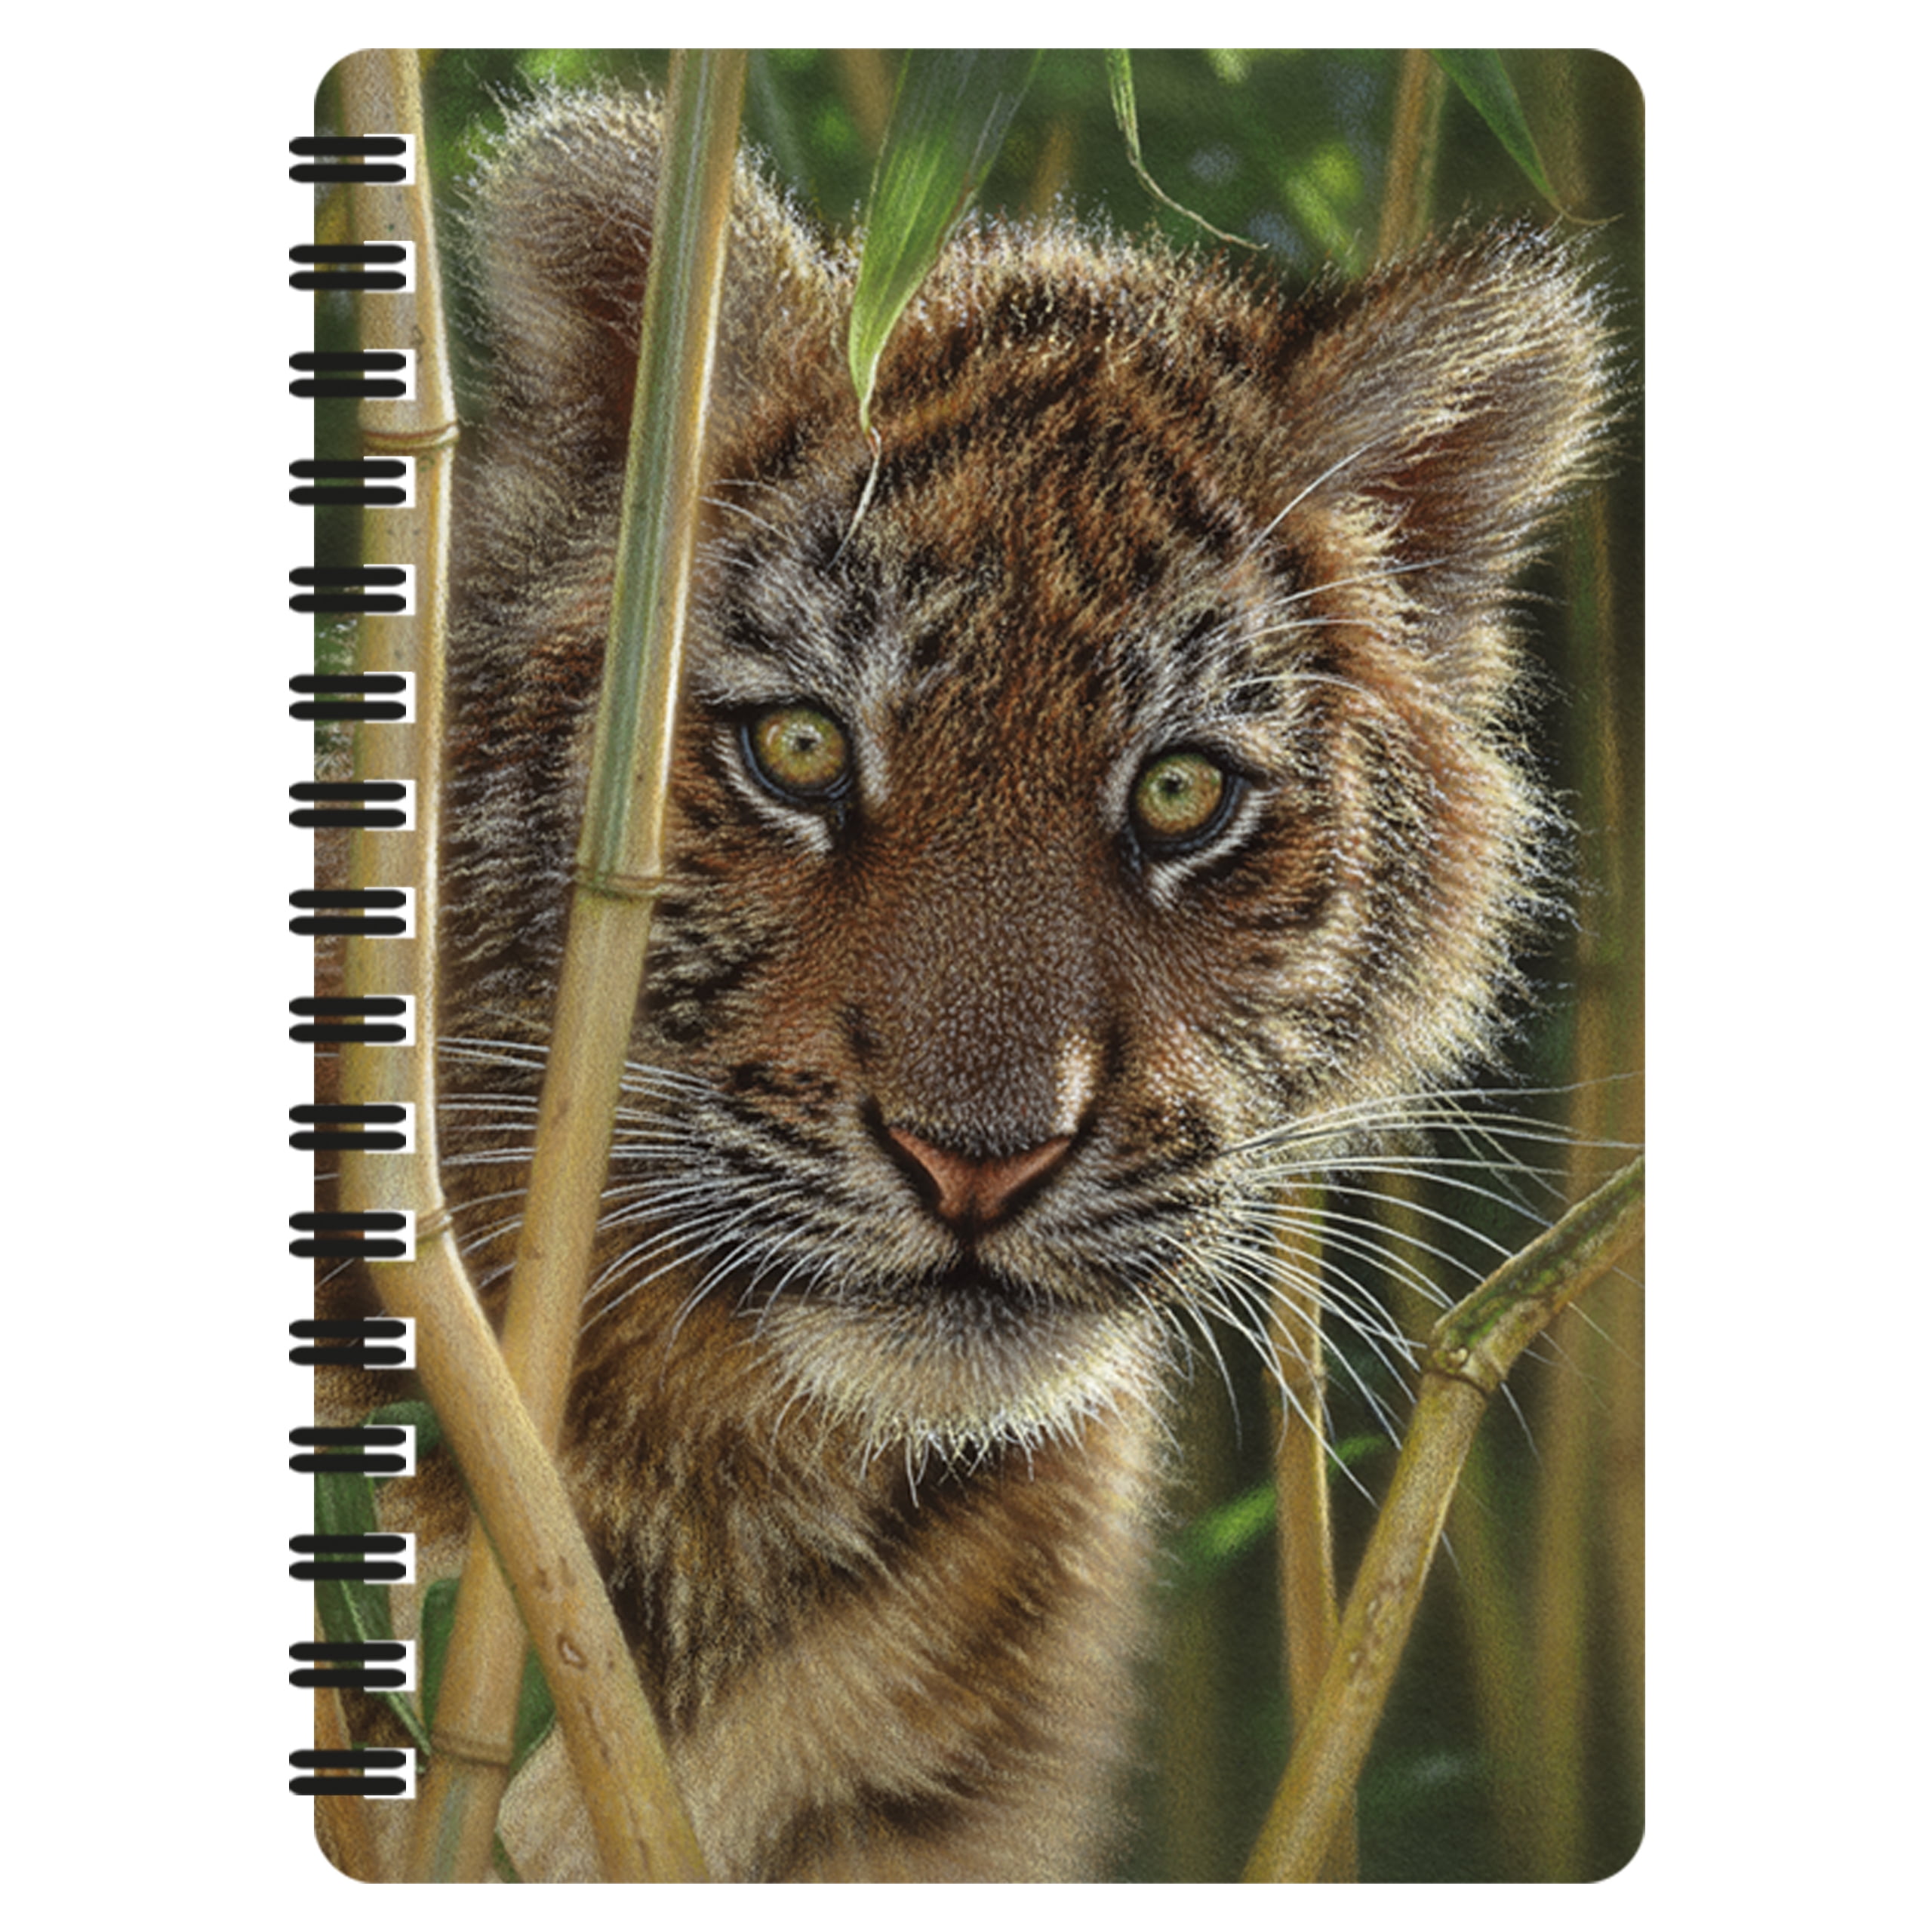 3D LiveLife Jotter - Discovery from Deluxebase. Lenticular 3D Tiger 6x4  Spiral Notebook with plain recycled paper pages. Artwork licensed from  renowned artist Collin Bogle 